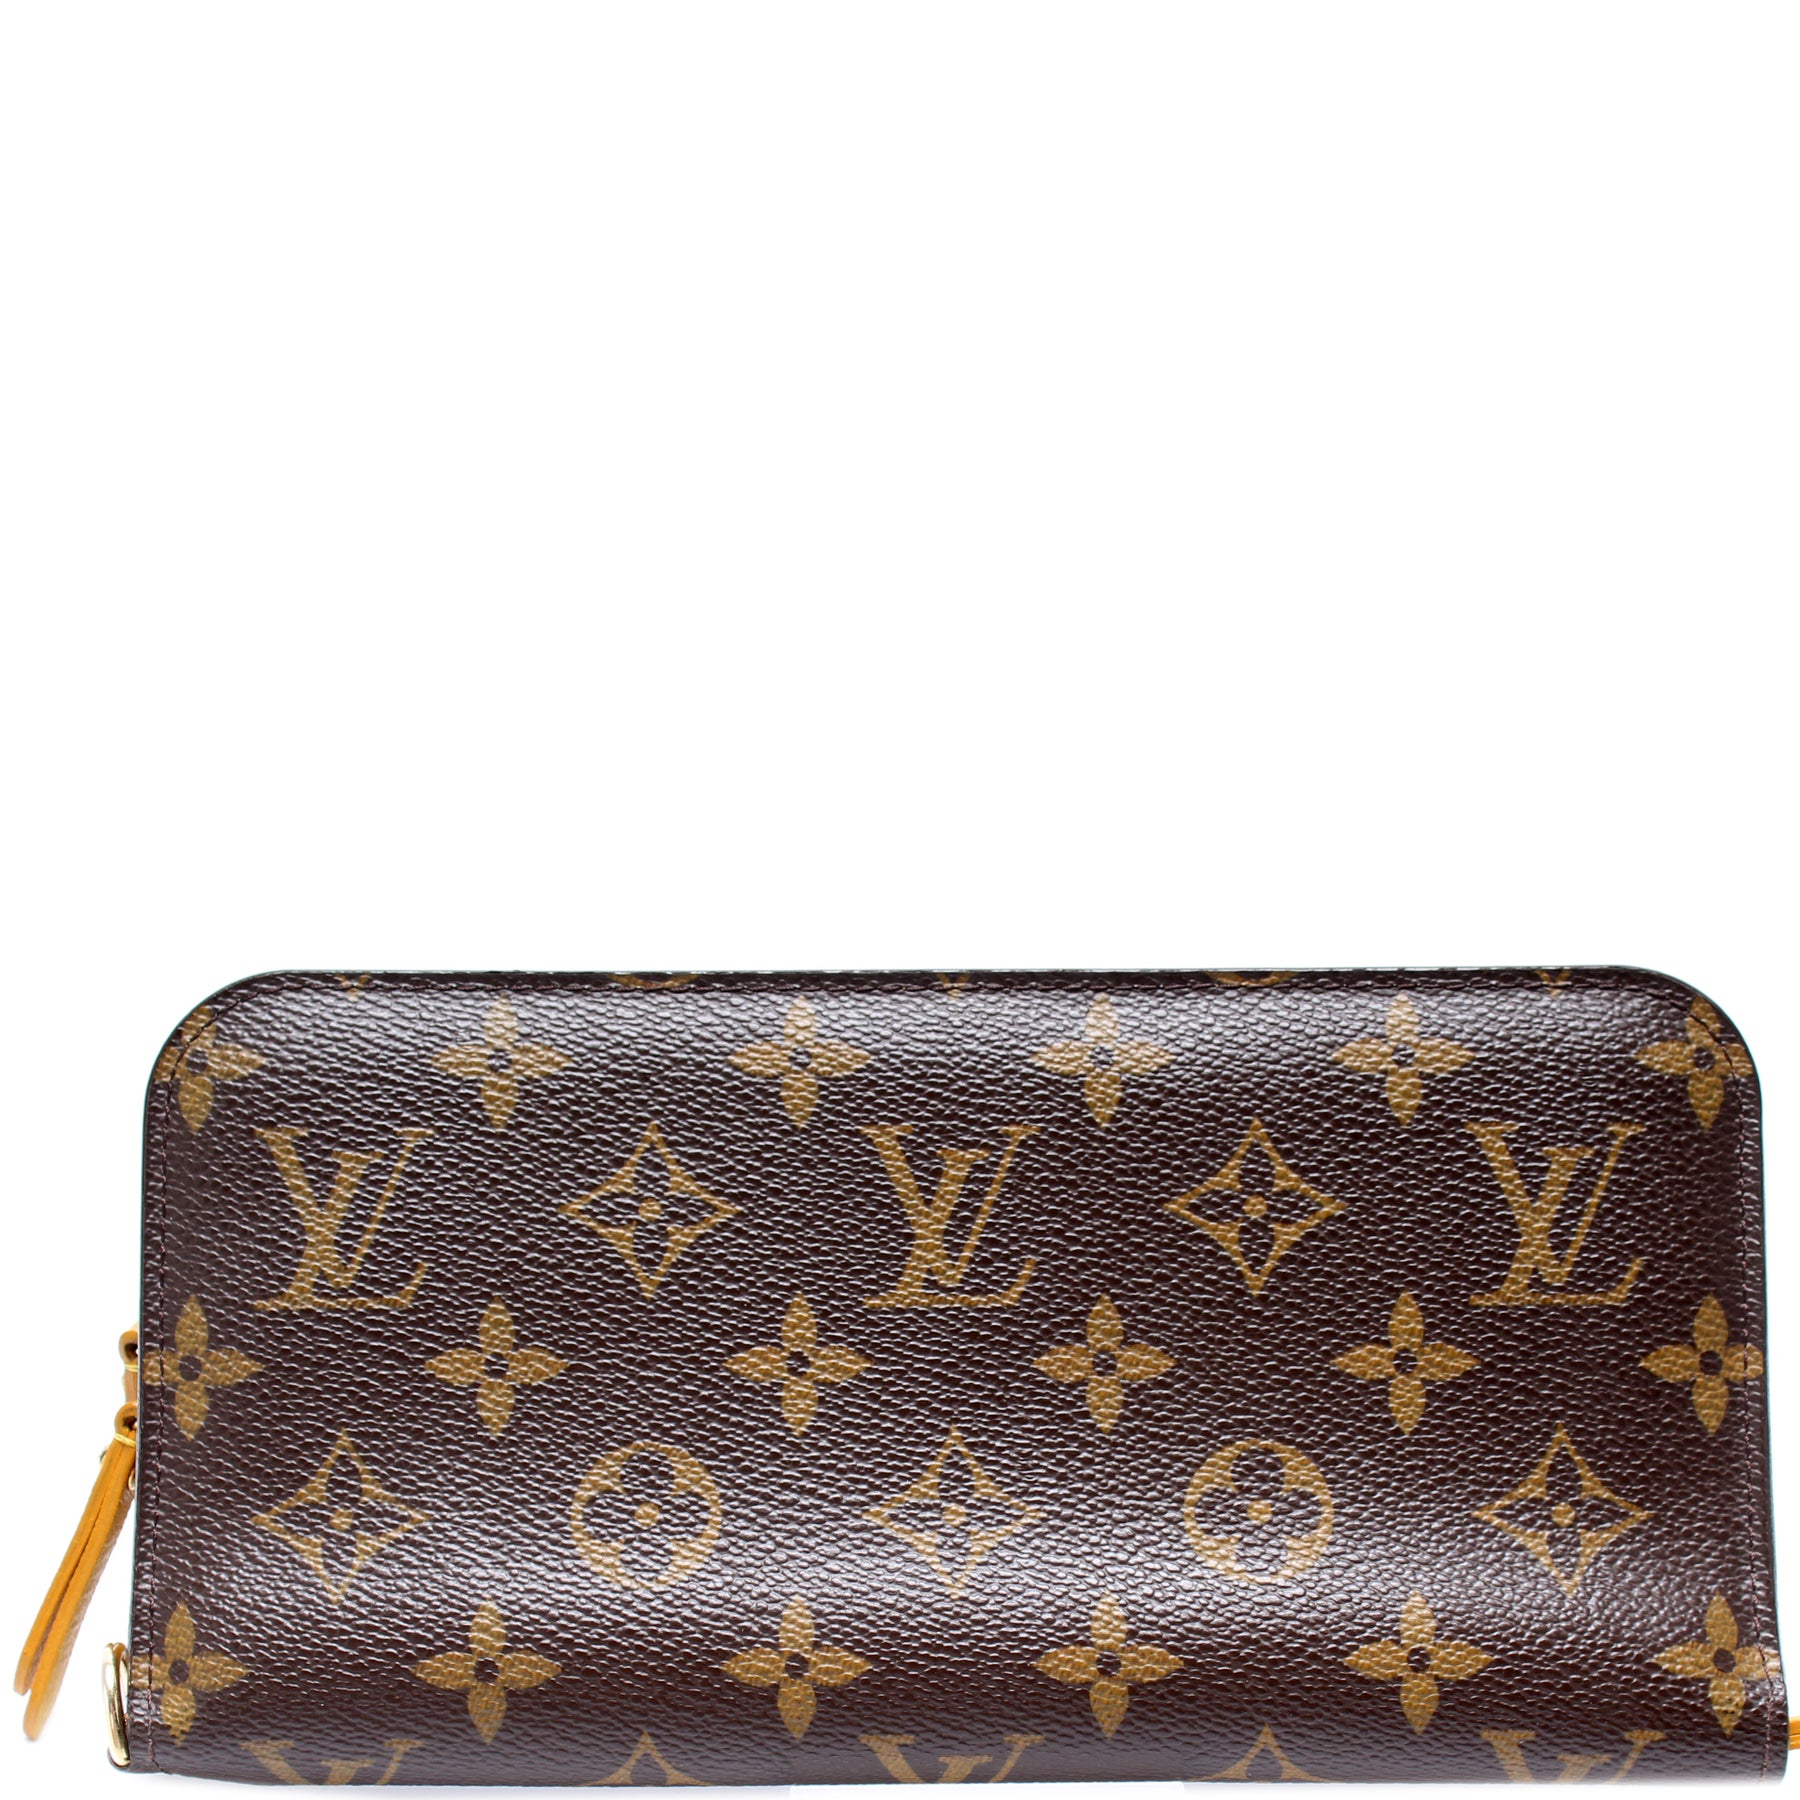 Louis Vuitton - Authenticated Insolite Wallet - Leather Brown for Women, Very Good Condition